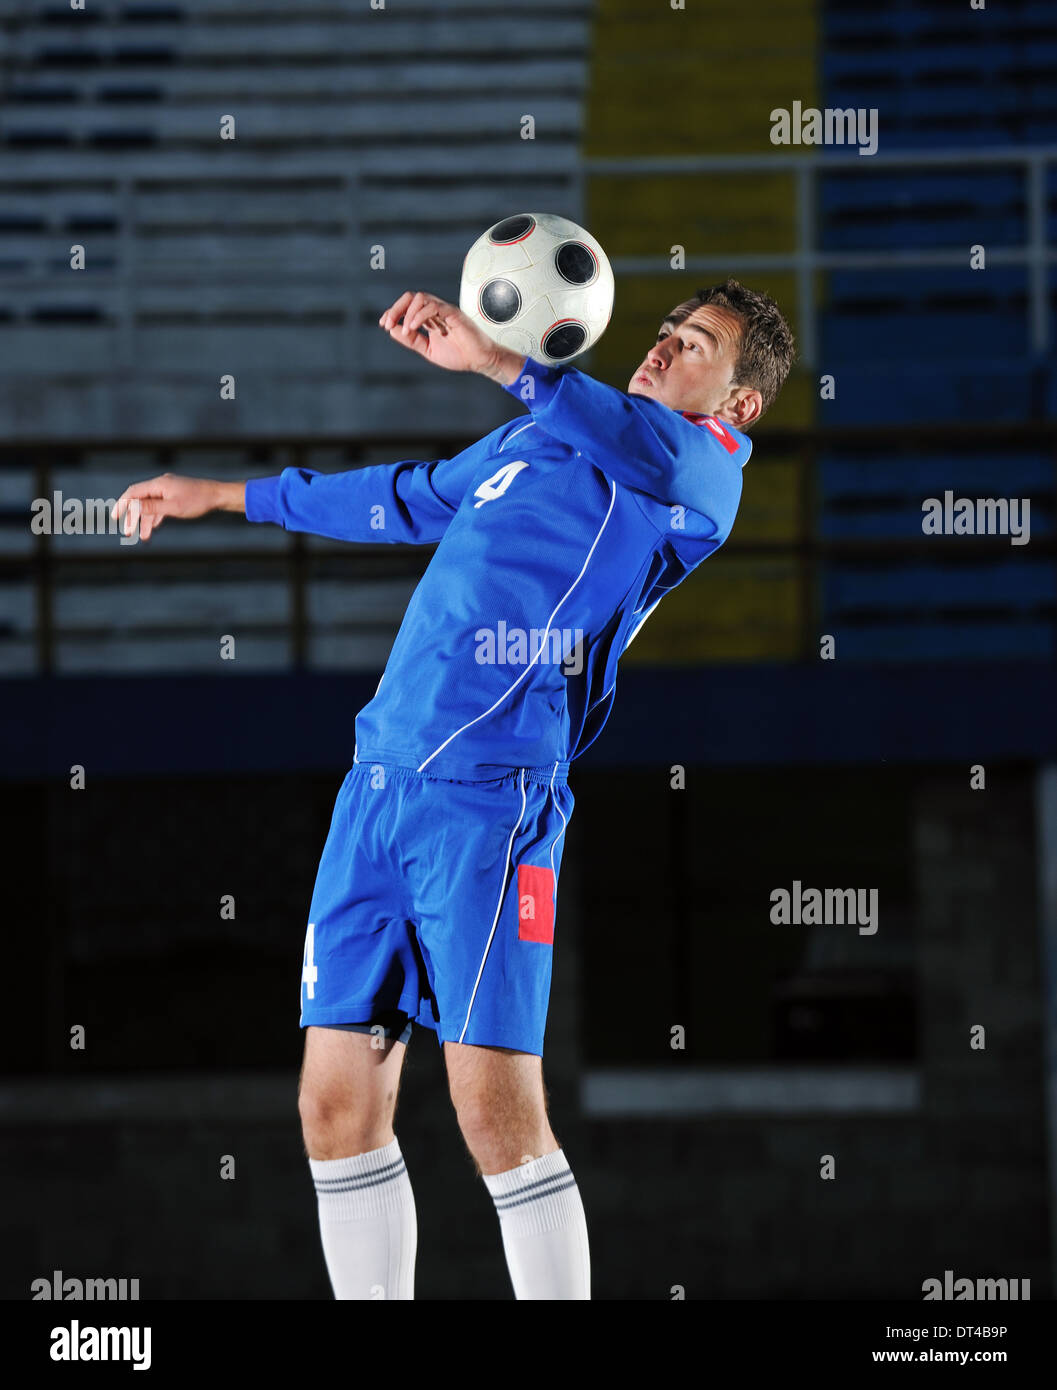 football player in action Stock Photo